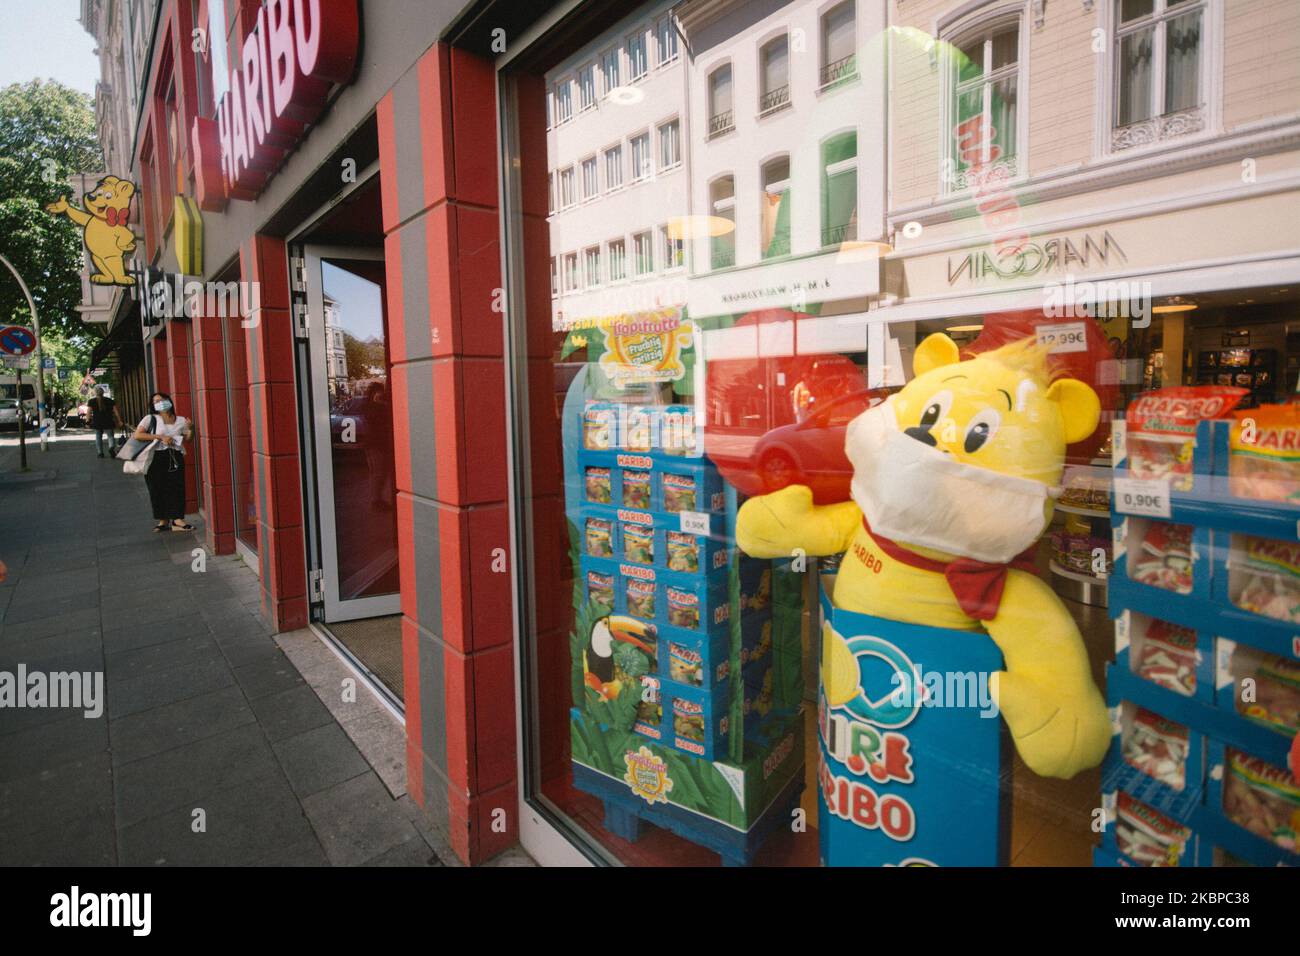 A Haribo Gold Bear with face mask is seen in a Haribo store in Bonn, Germany, on May 28, 2020. (Photo by Ying Tang/NurPhoto) Stock Photo